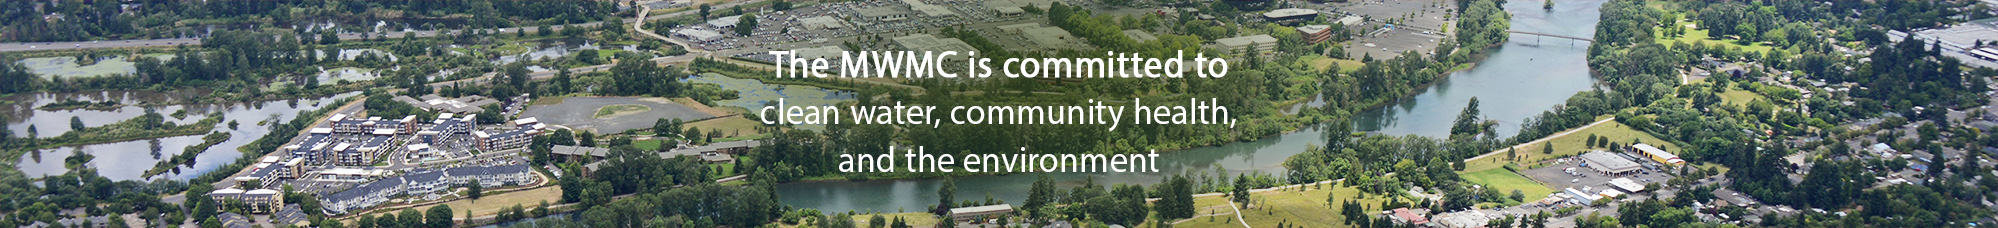 MWMC website header - The MWMC is committed to clean water, community health, and the environment.